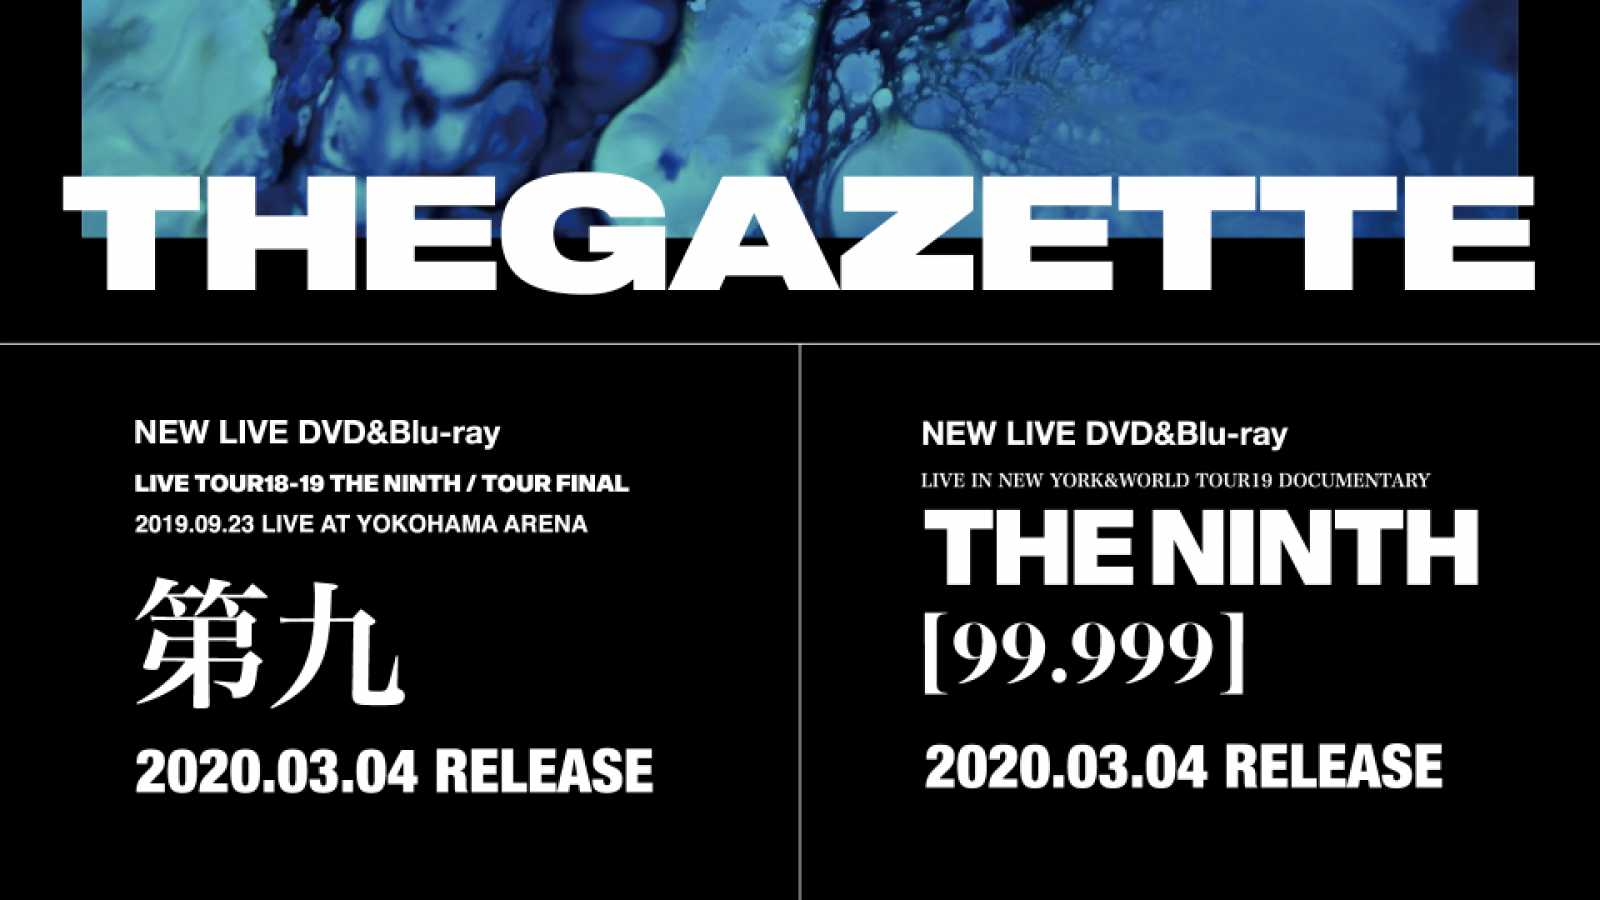 Nouvelles sorties audiovisuelles pour the GazettE © HERESY Inc. All rights reserved.